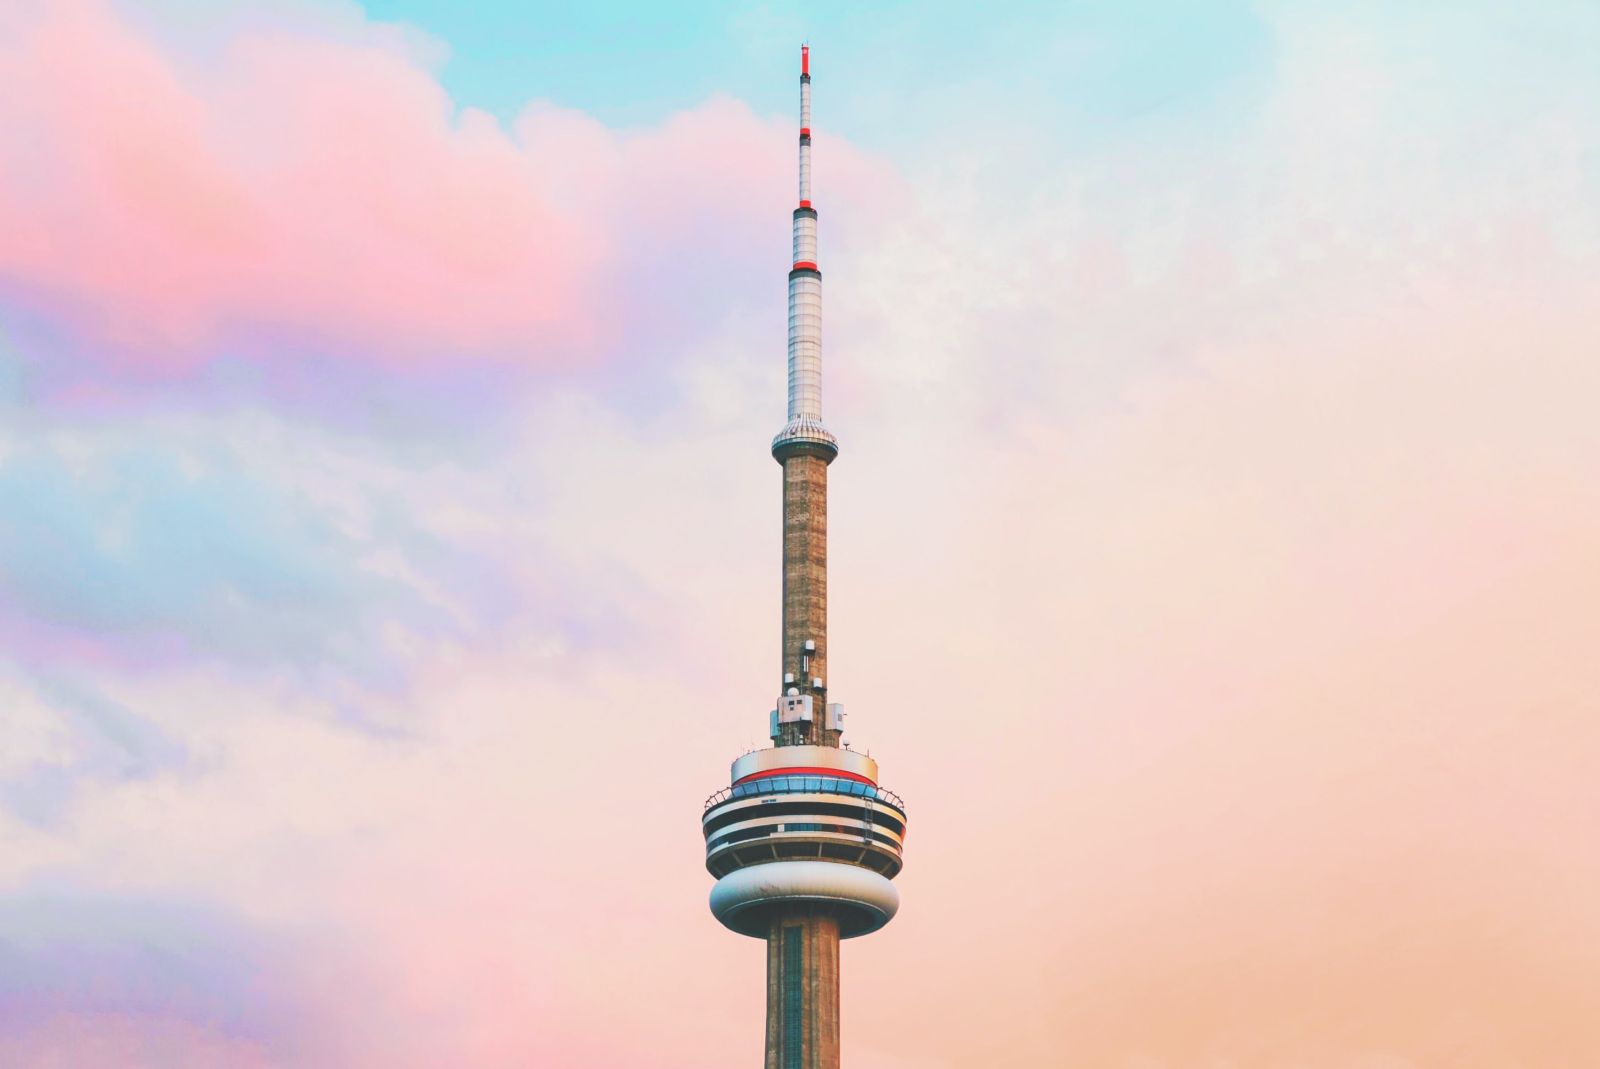 Image of the CN Tower